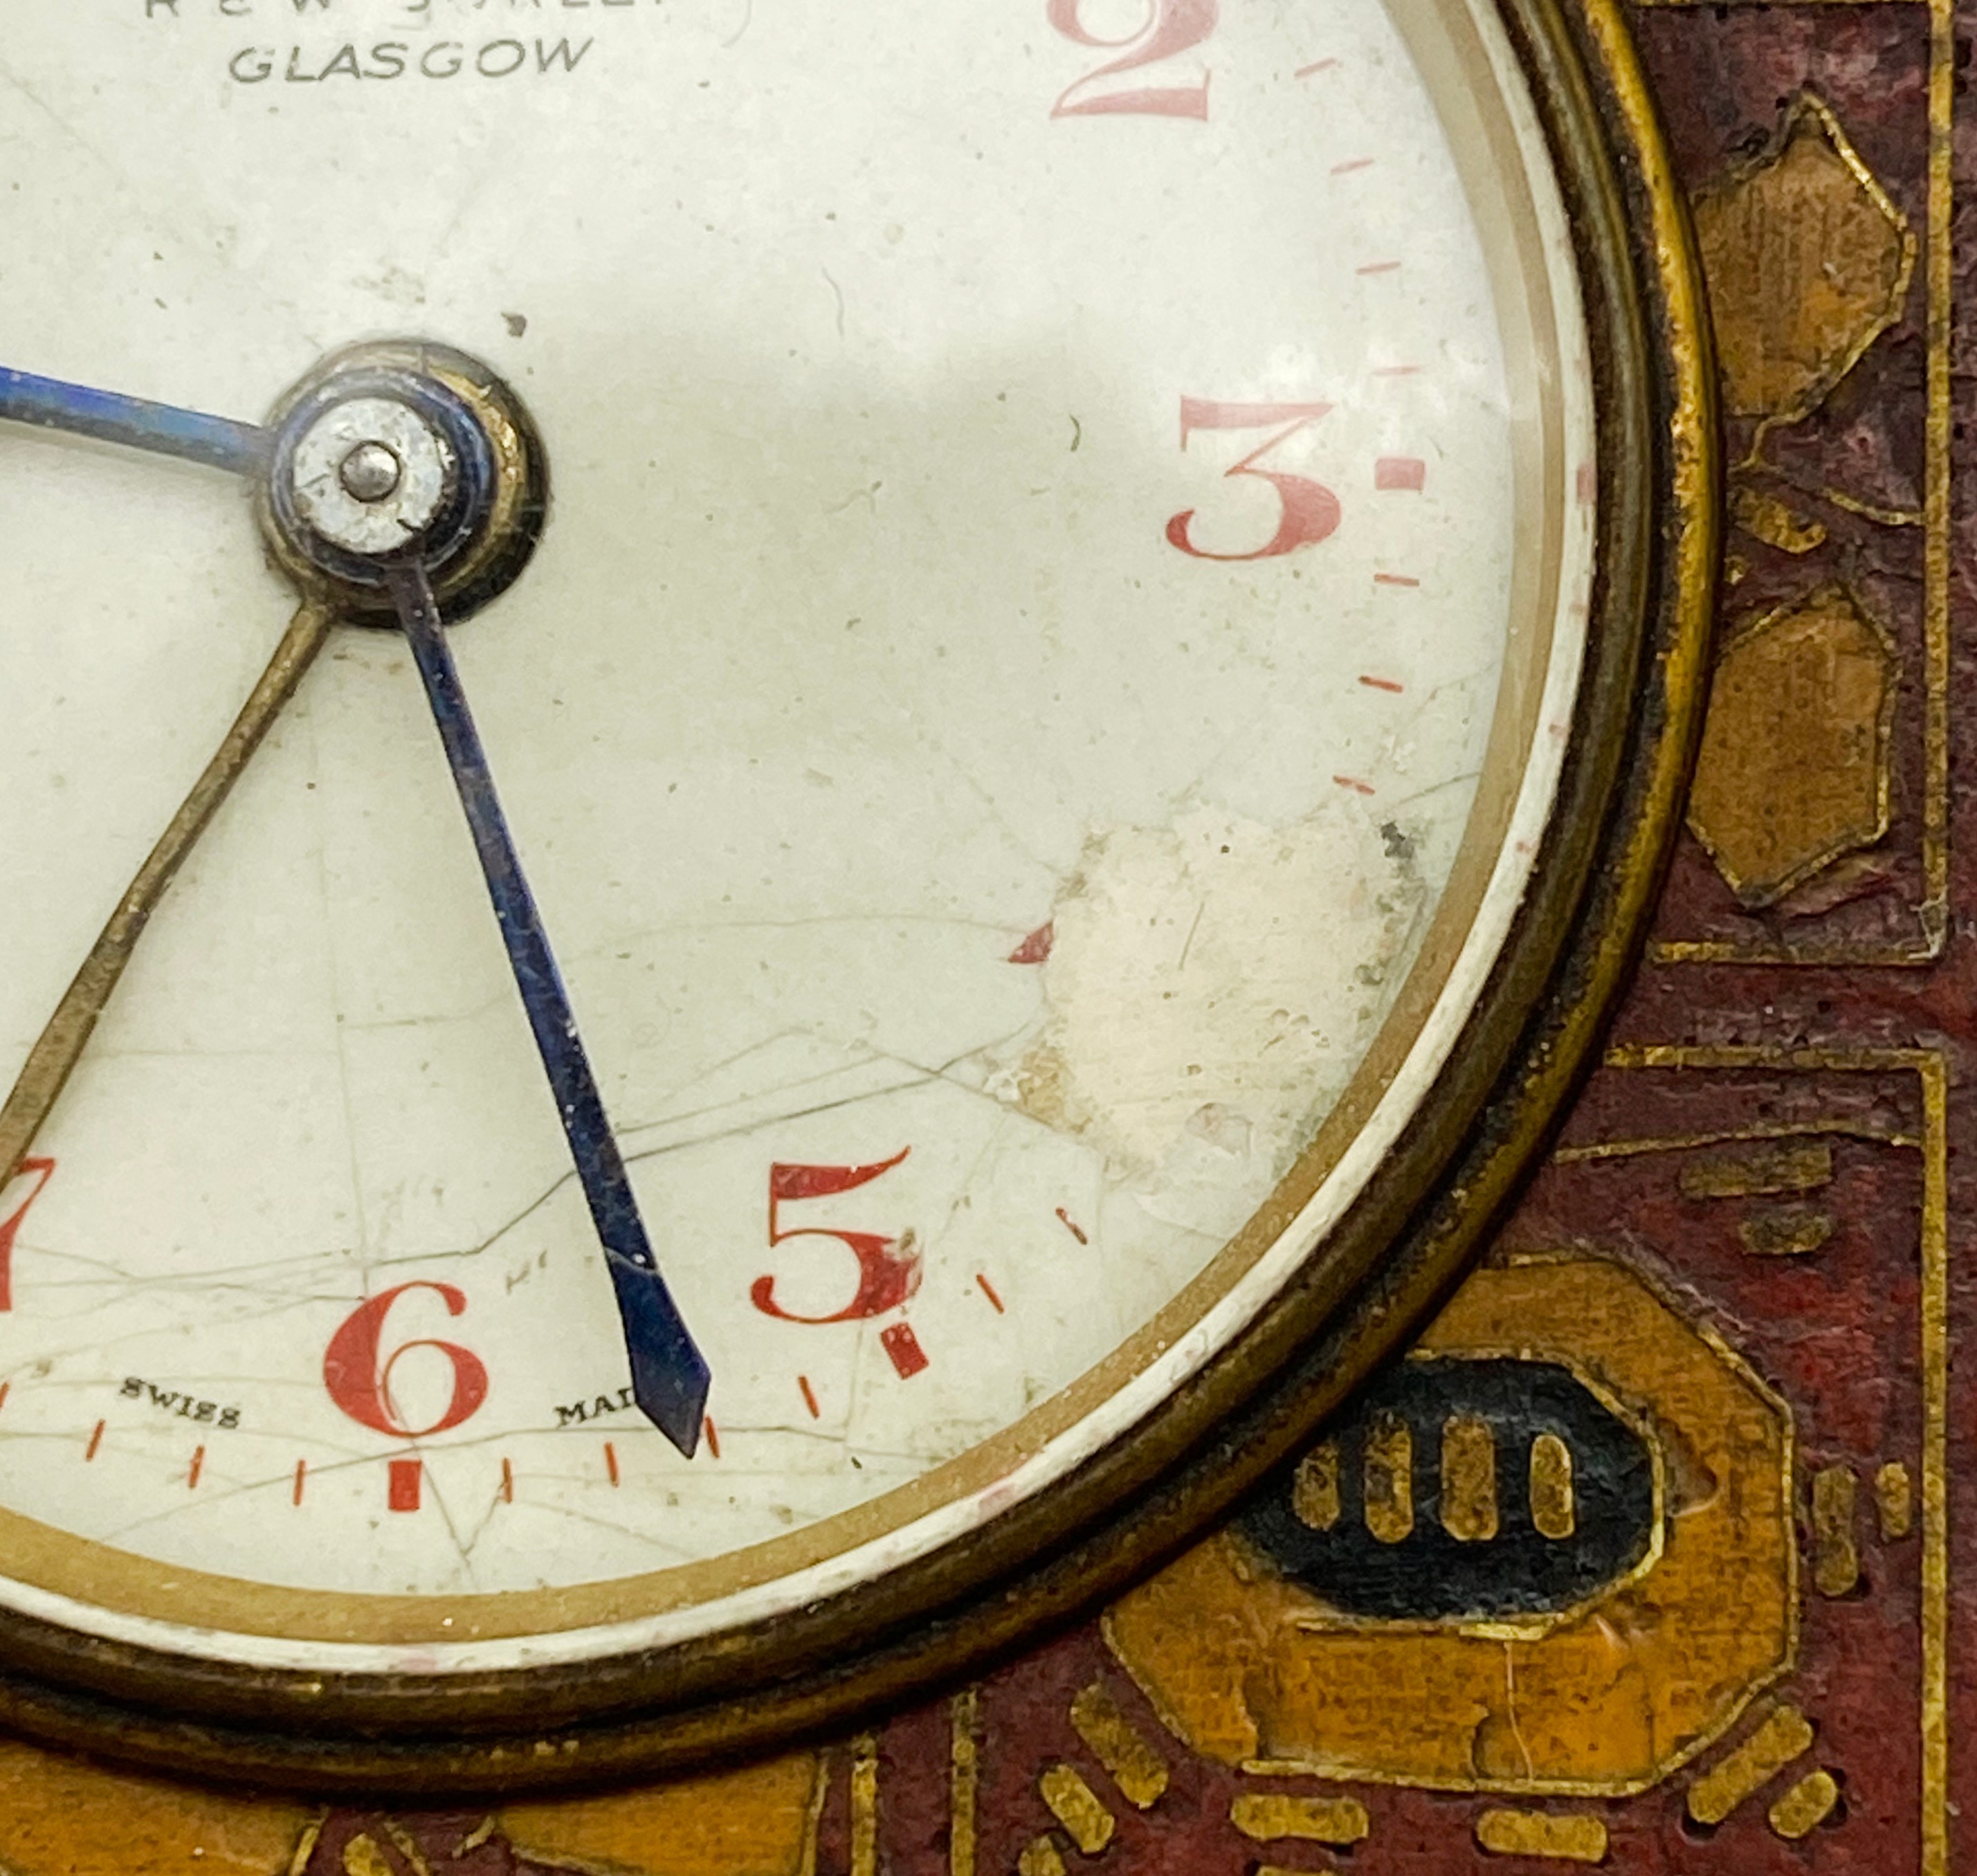 MINIATURE ARTS & CRAFT TRAVEL ENAMELLED CLOCK BY ROBERT & WILLIAM SORLEY GLASGOW A/F - Image 6 of 9